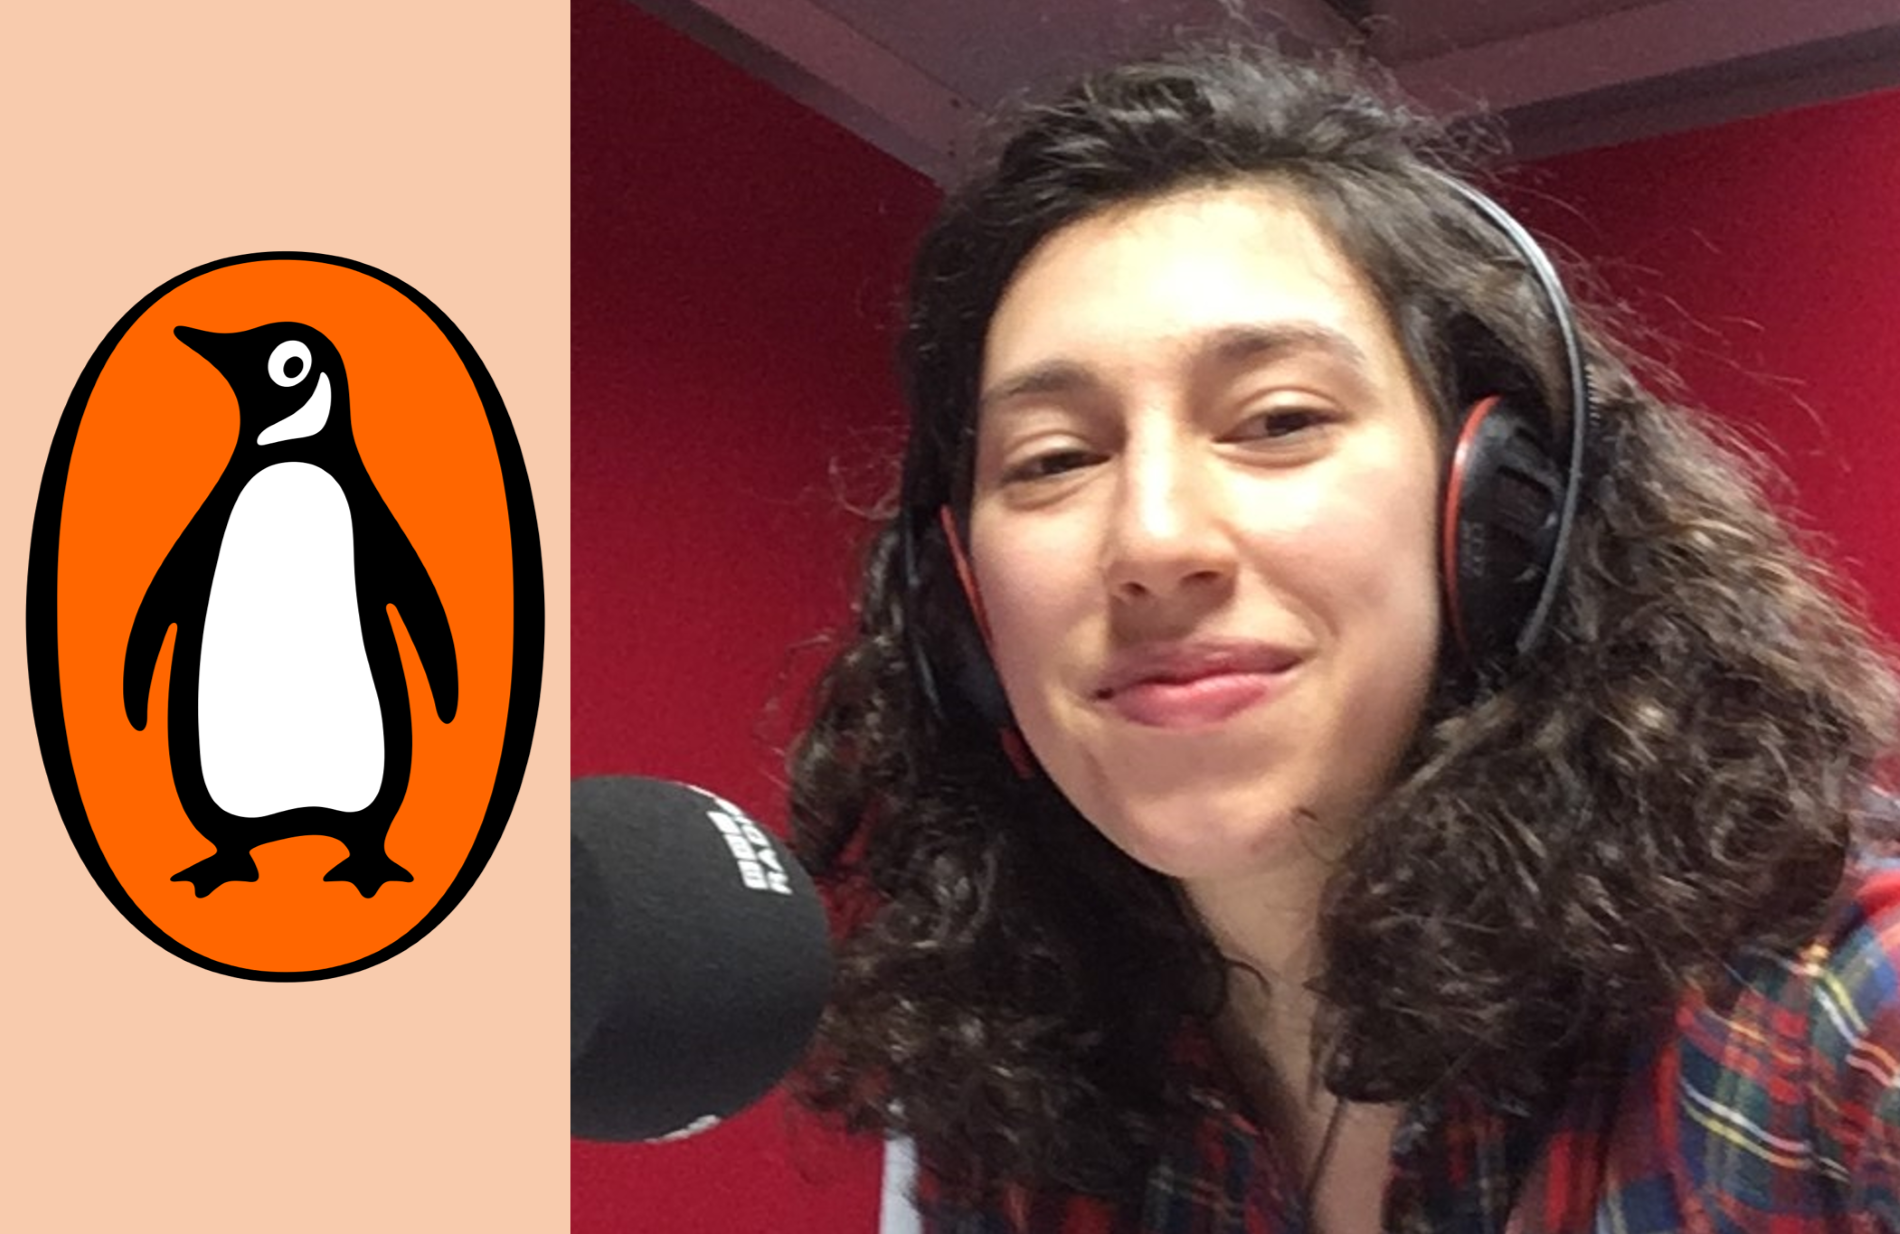 Right: Dr Katerina Johnson in front of a microphone with the BBC logo on it. Left: the Penguin logo.